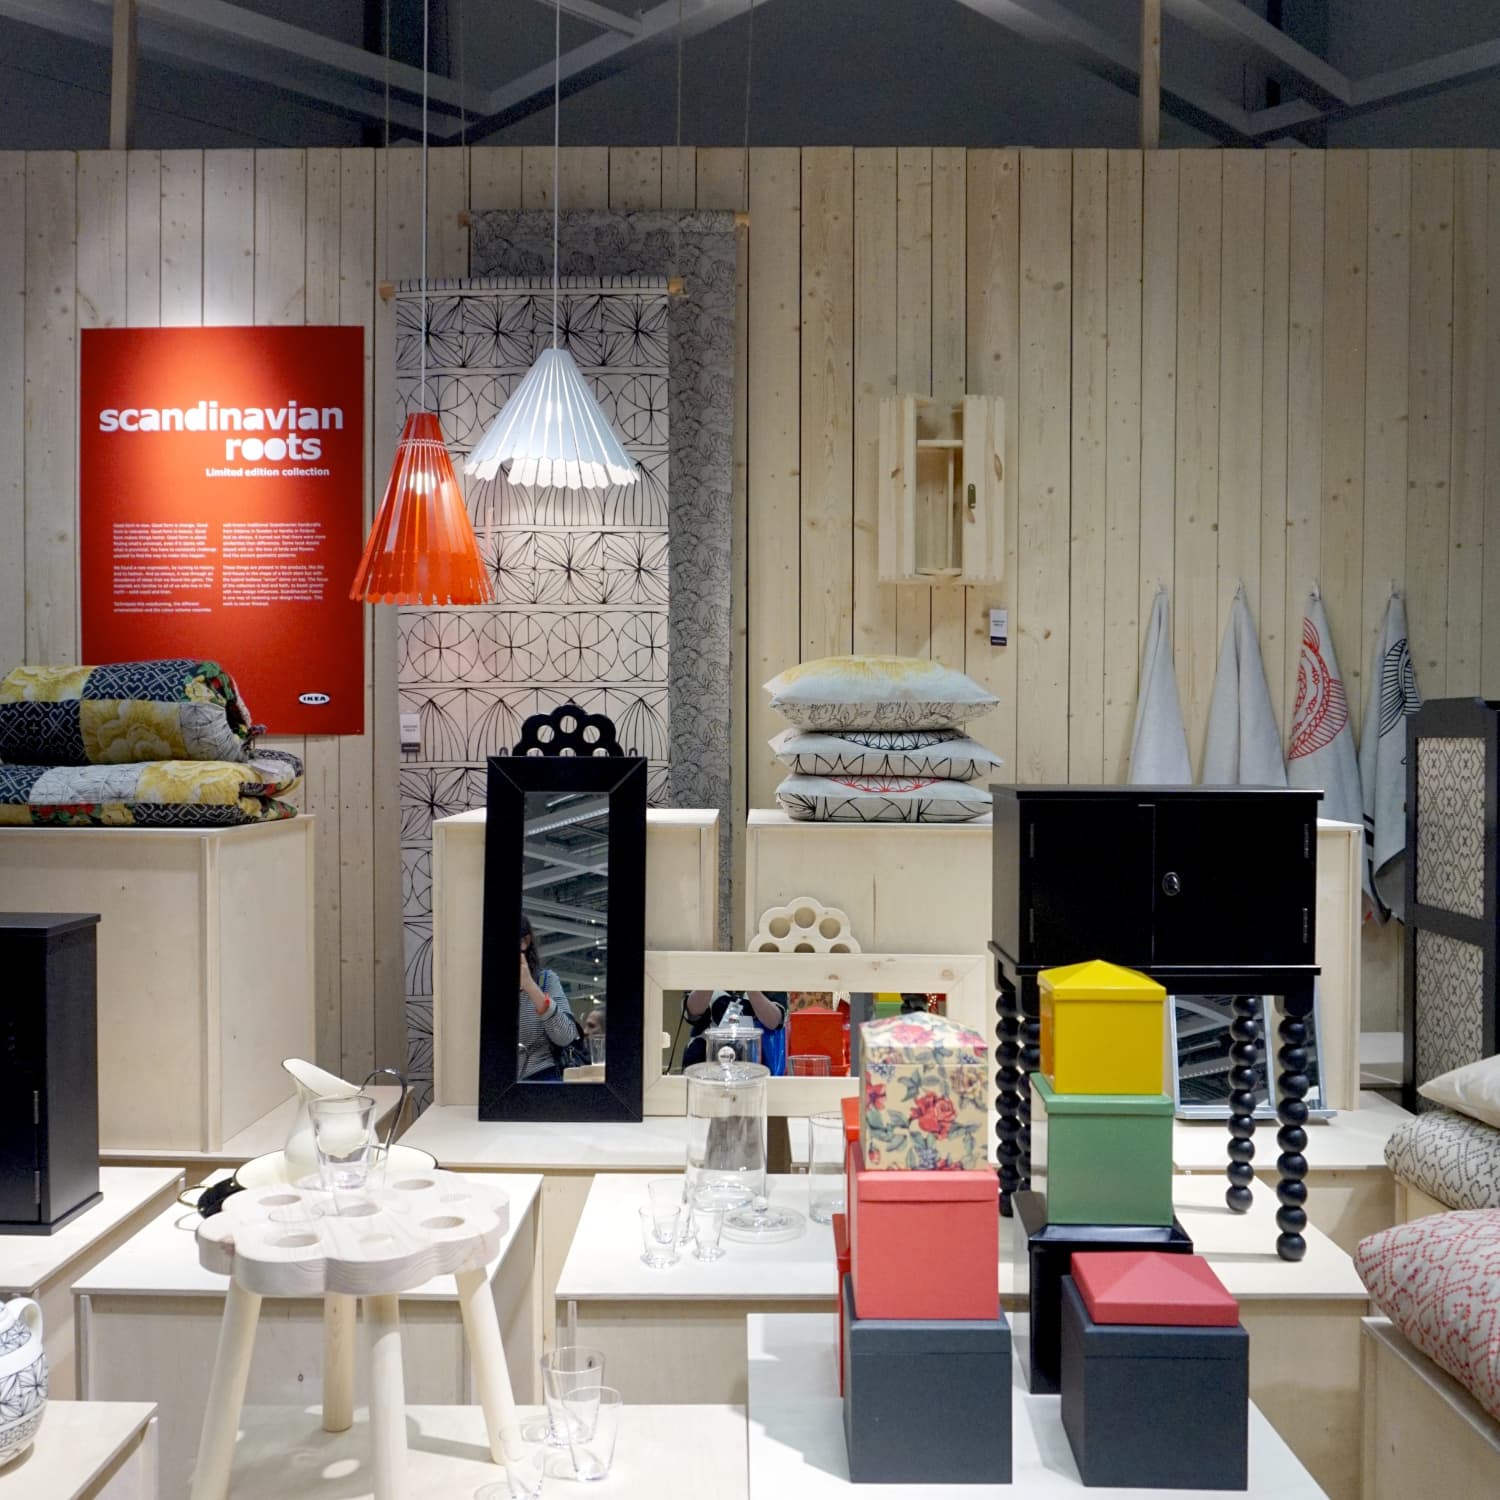 A Sneak Peek at IKEA's New 2015 Collections | Apartment Therapy